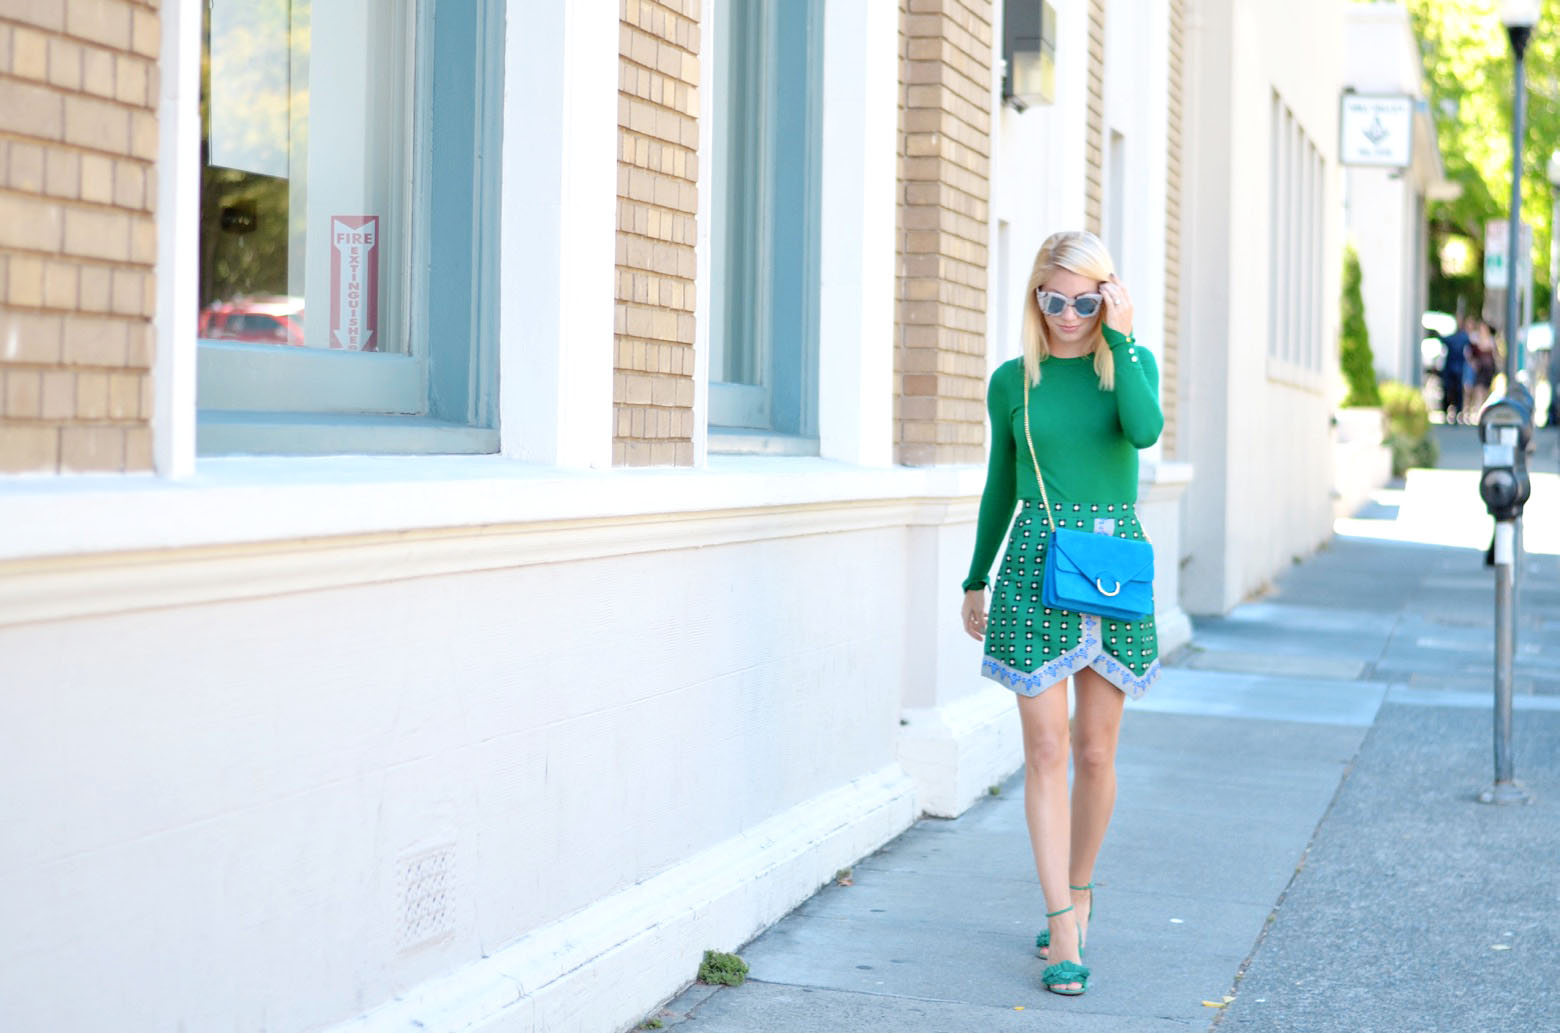 head to toe emerald green color, street style by Stefanie of the Style Safari featuring all green outfit with zara sweater and green sari print skirt, blue suede banana republic shoulder bag